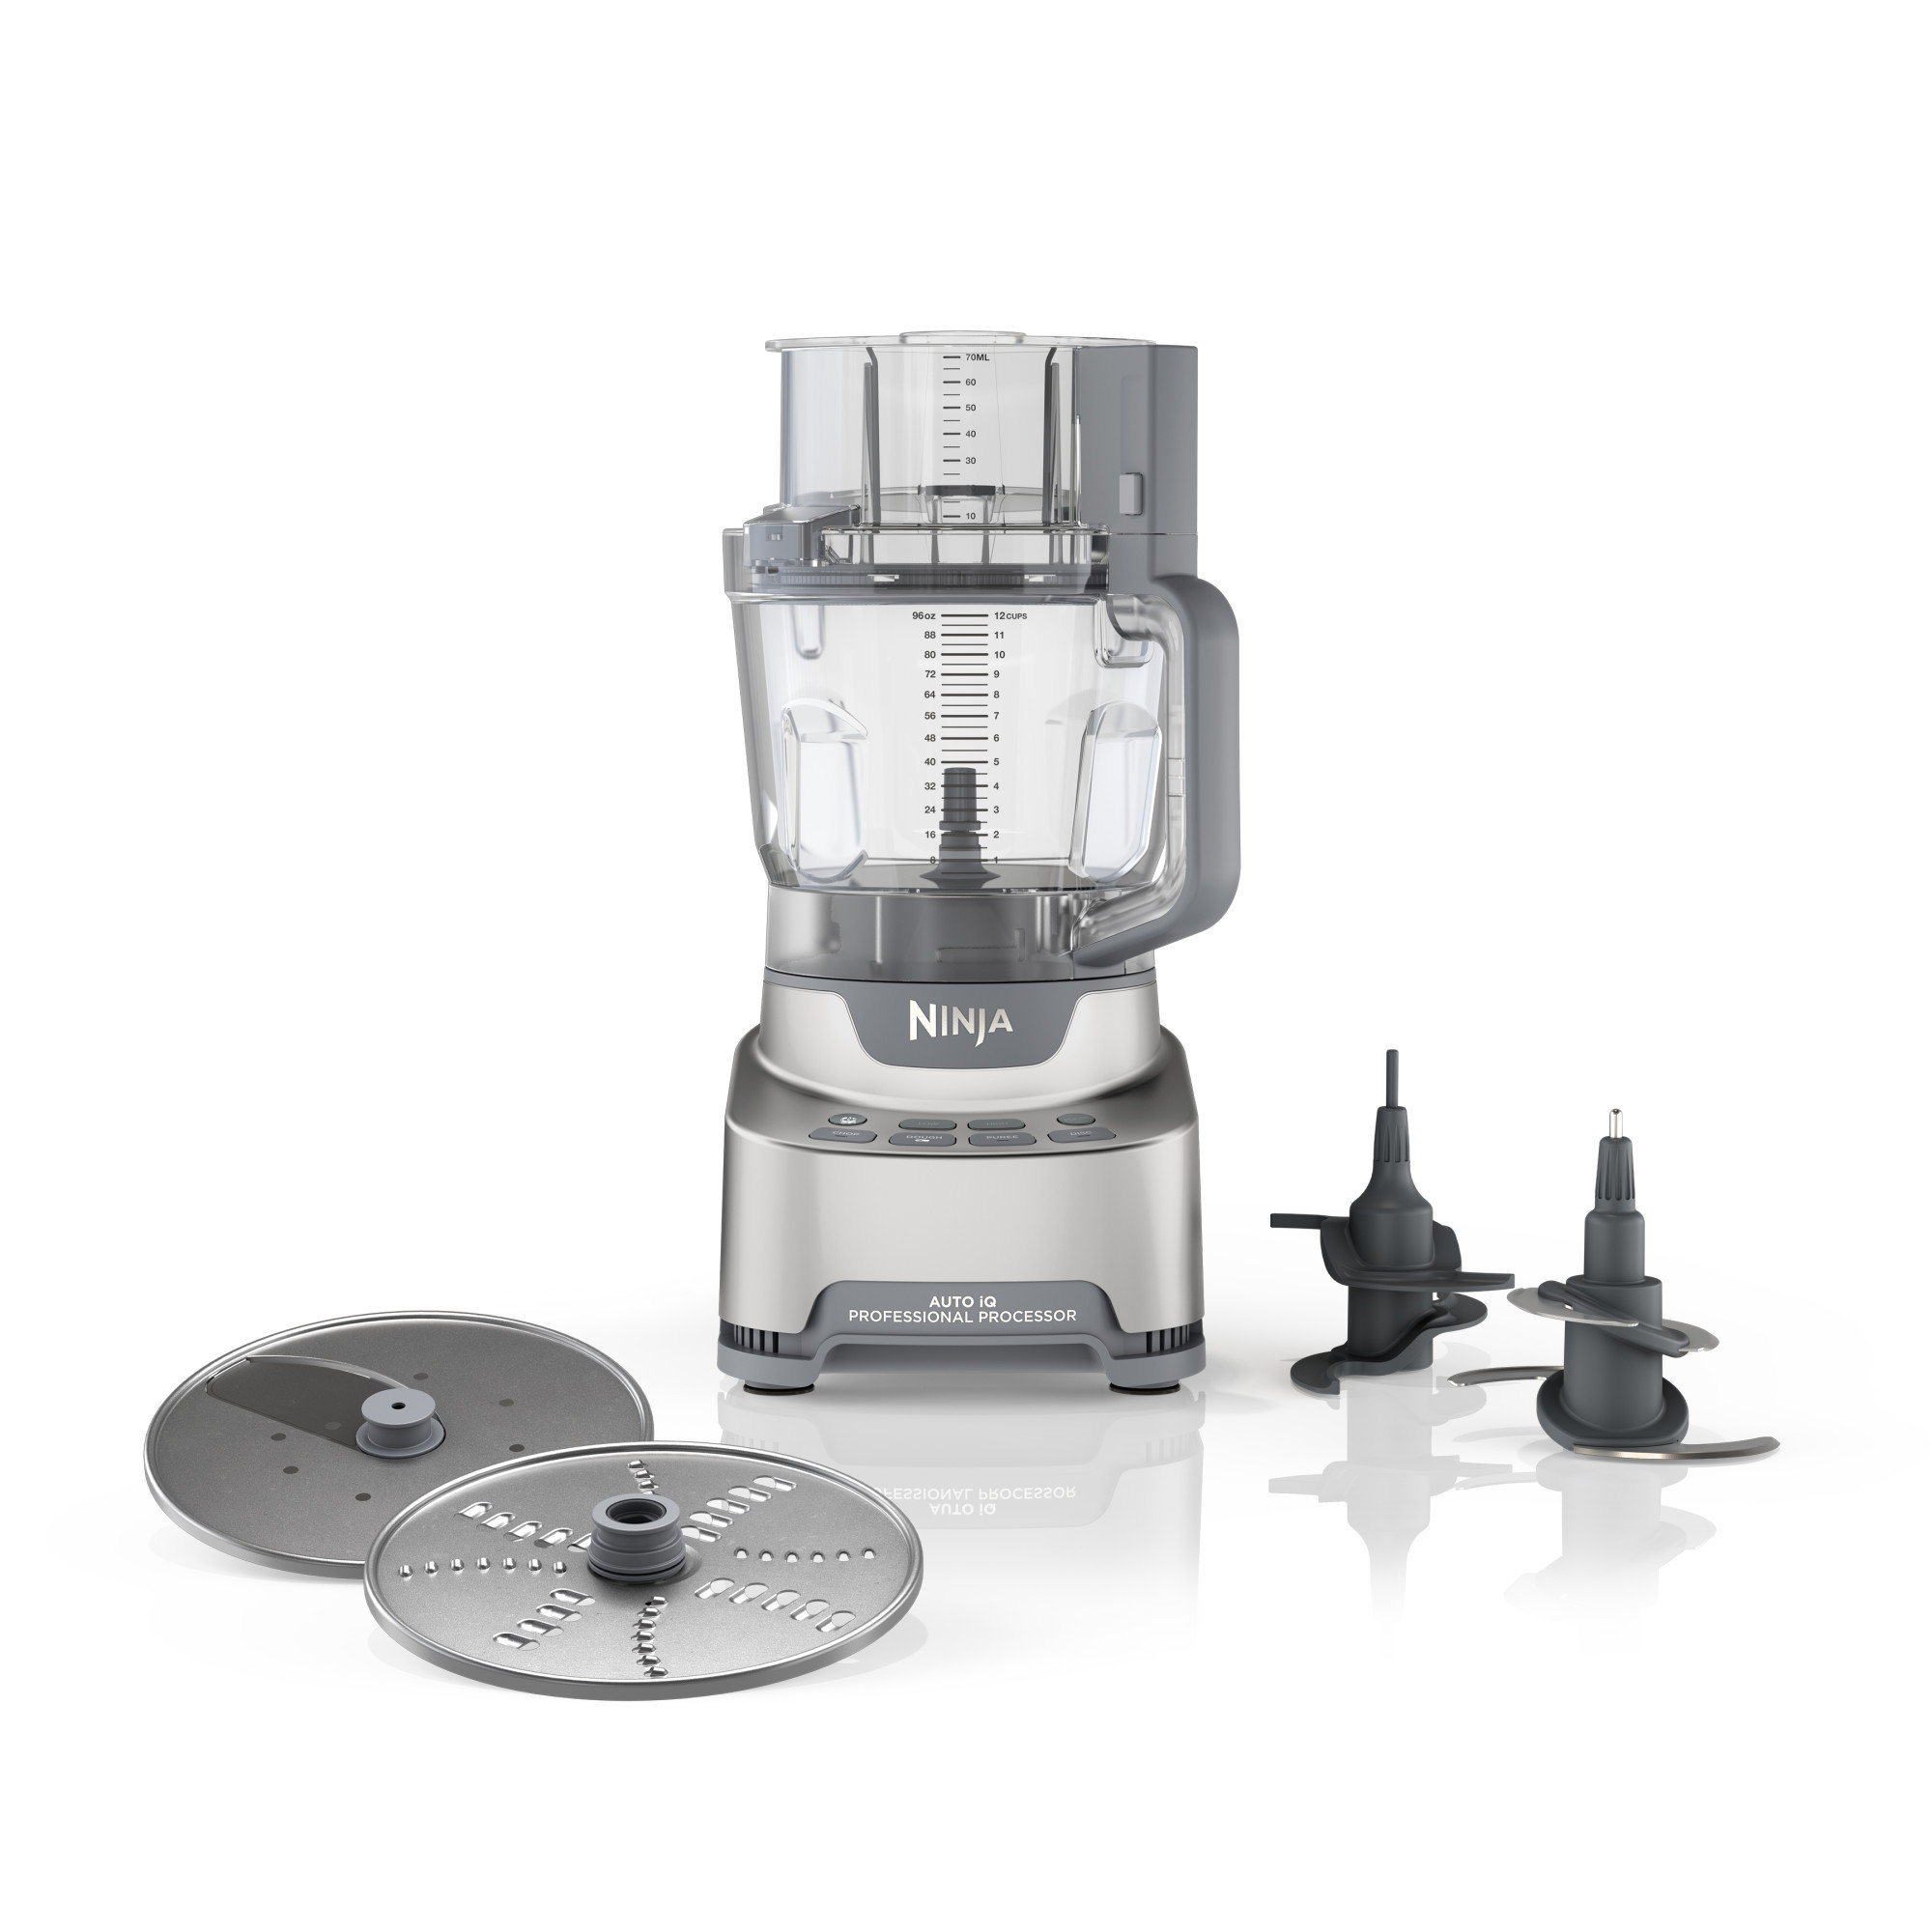 This Ninja blender is $30 off for Prime Day 2022 - The Manual